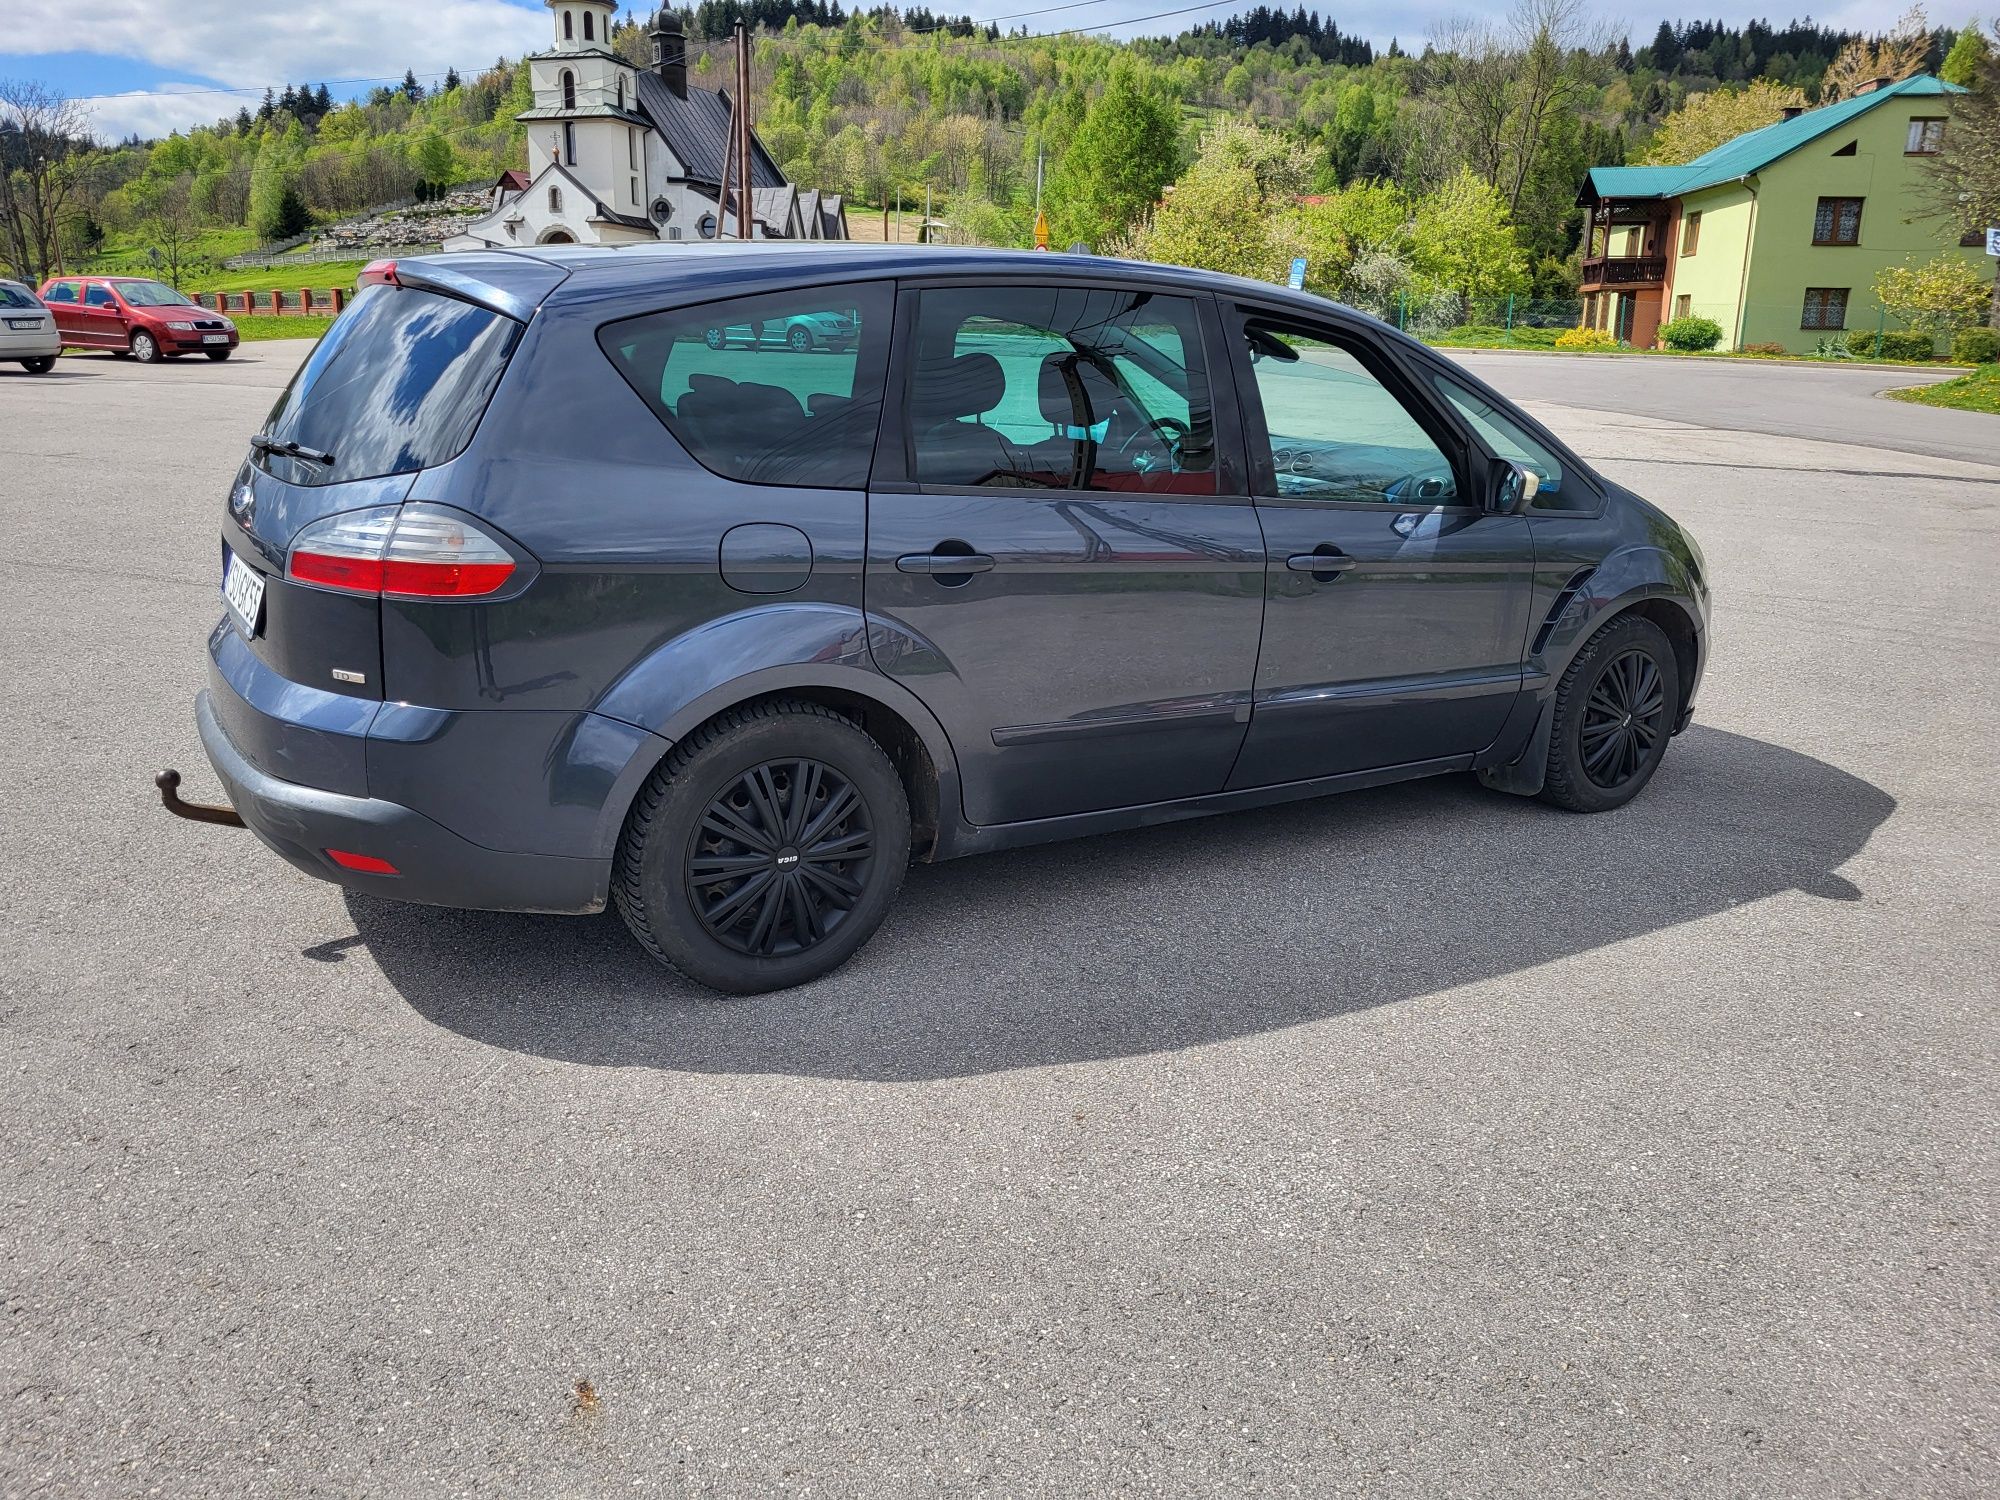 Ford S-max 1.8 tdci 125 KM 7 osobowy 2006 rok